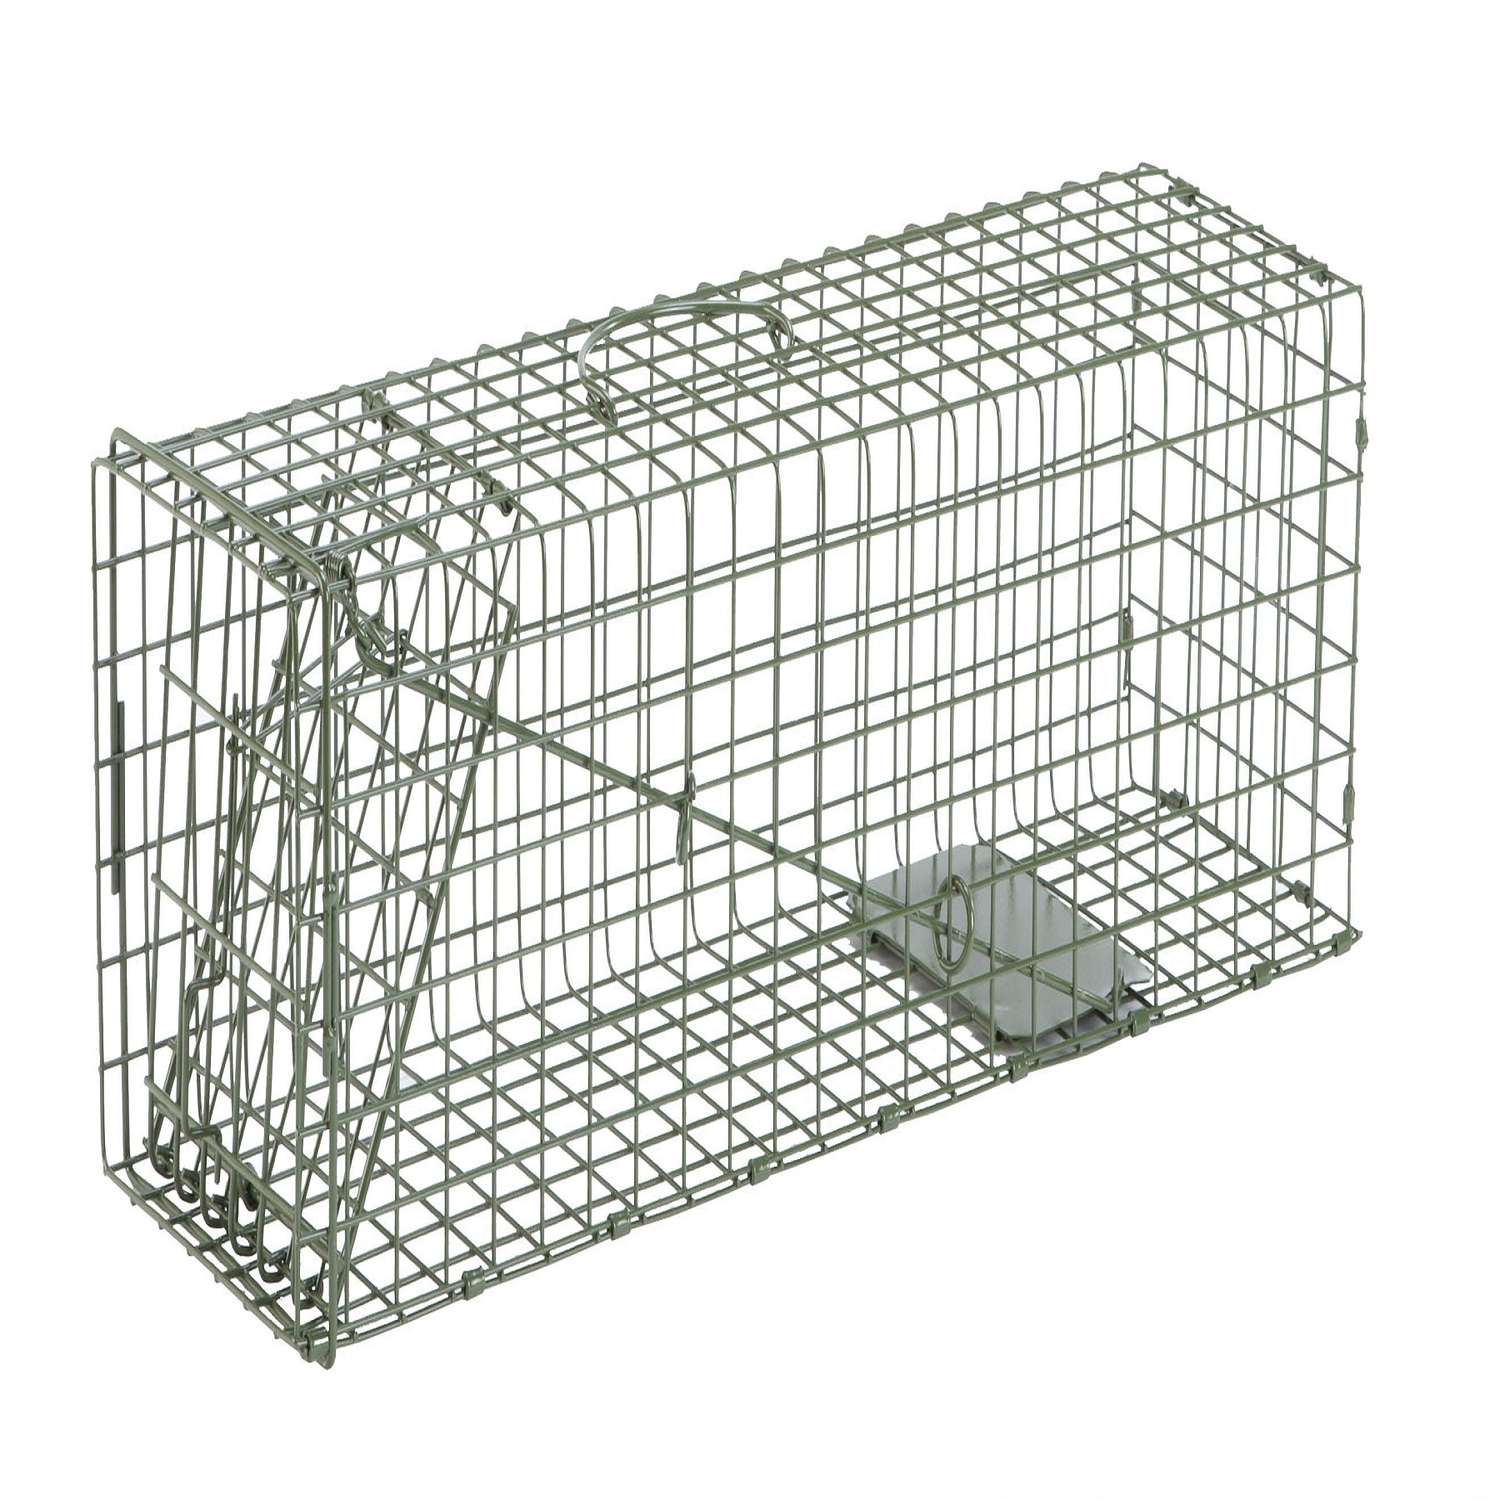 Duke Large Live Catch Cage Trap For Rabbits 1 pk - Ace Hardware